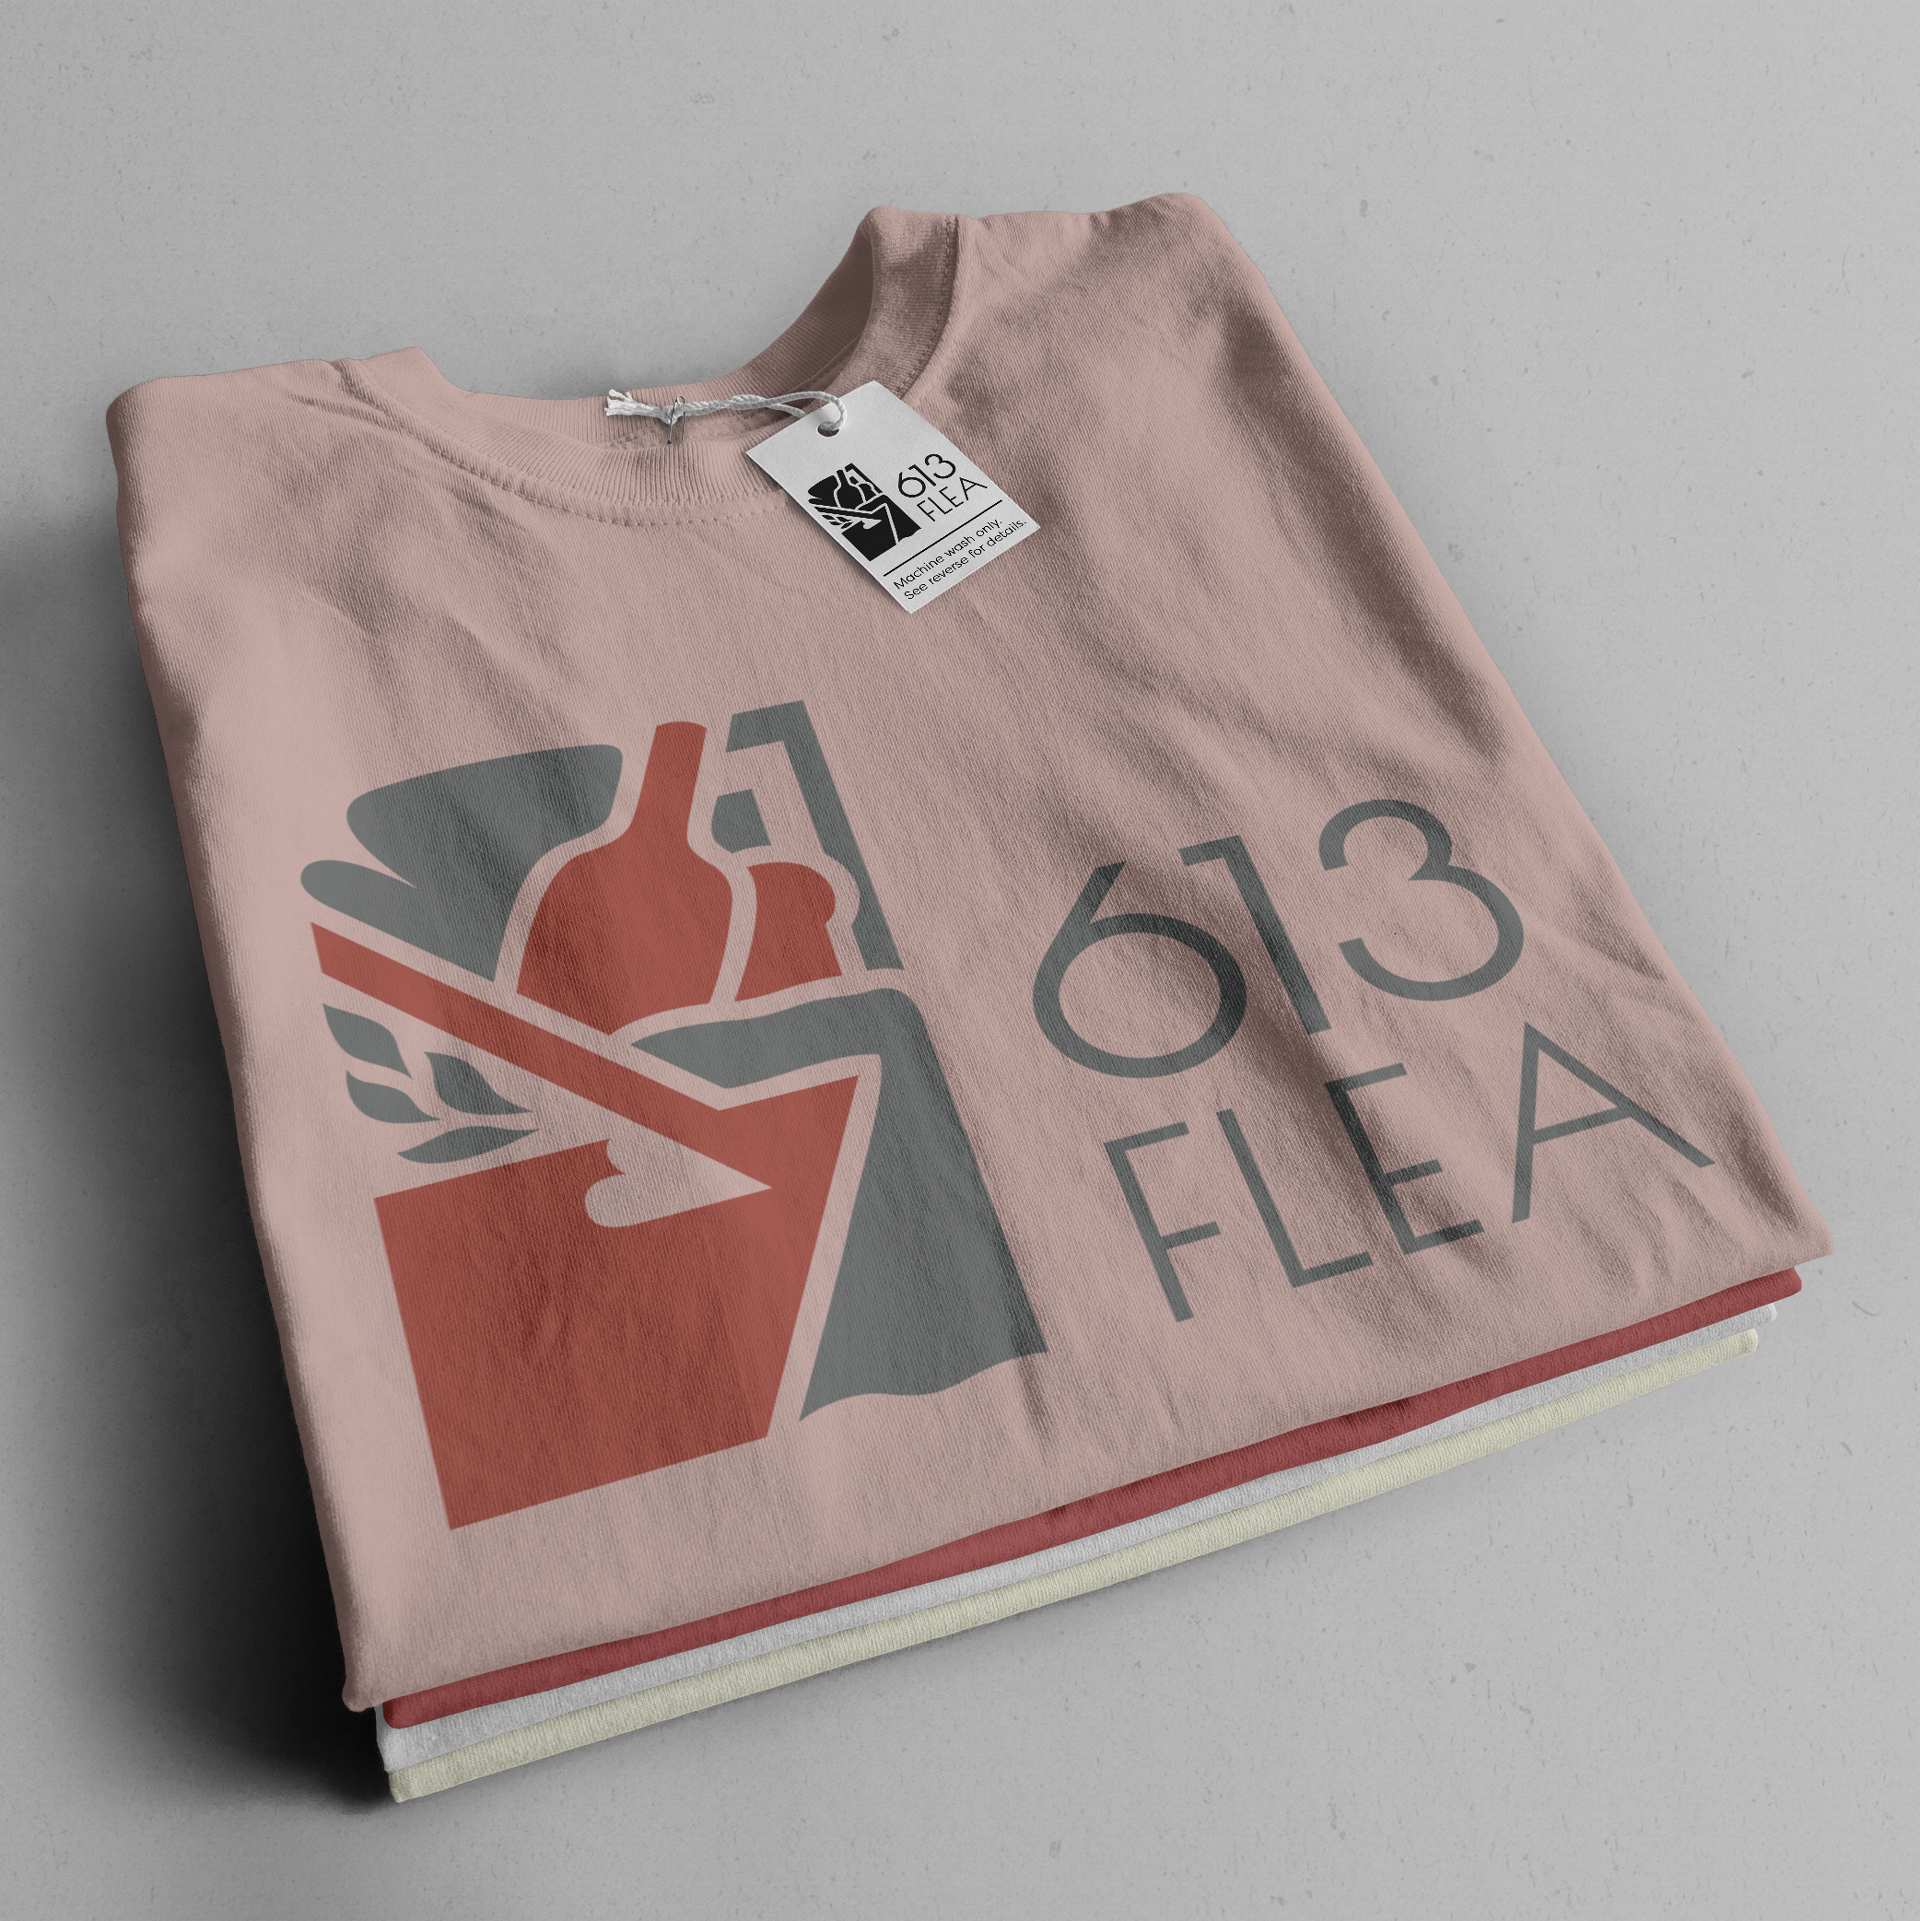 A pile of three folded shirts, which display the 613 flea logo.